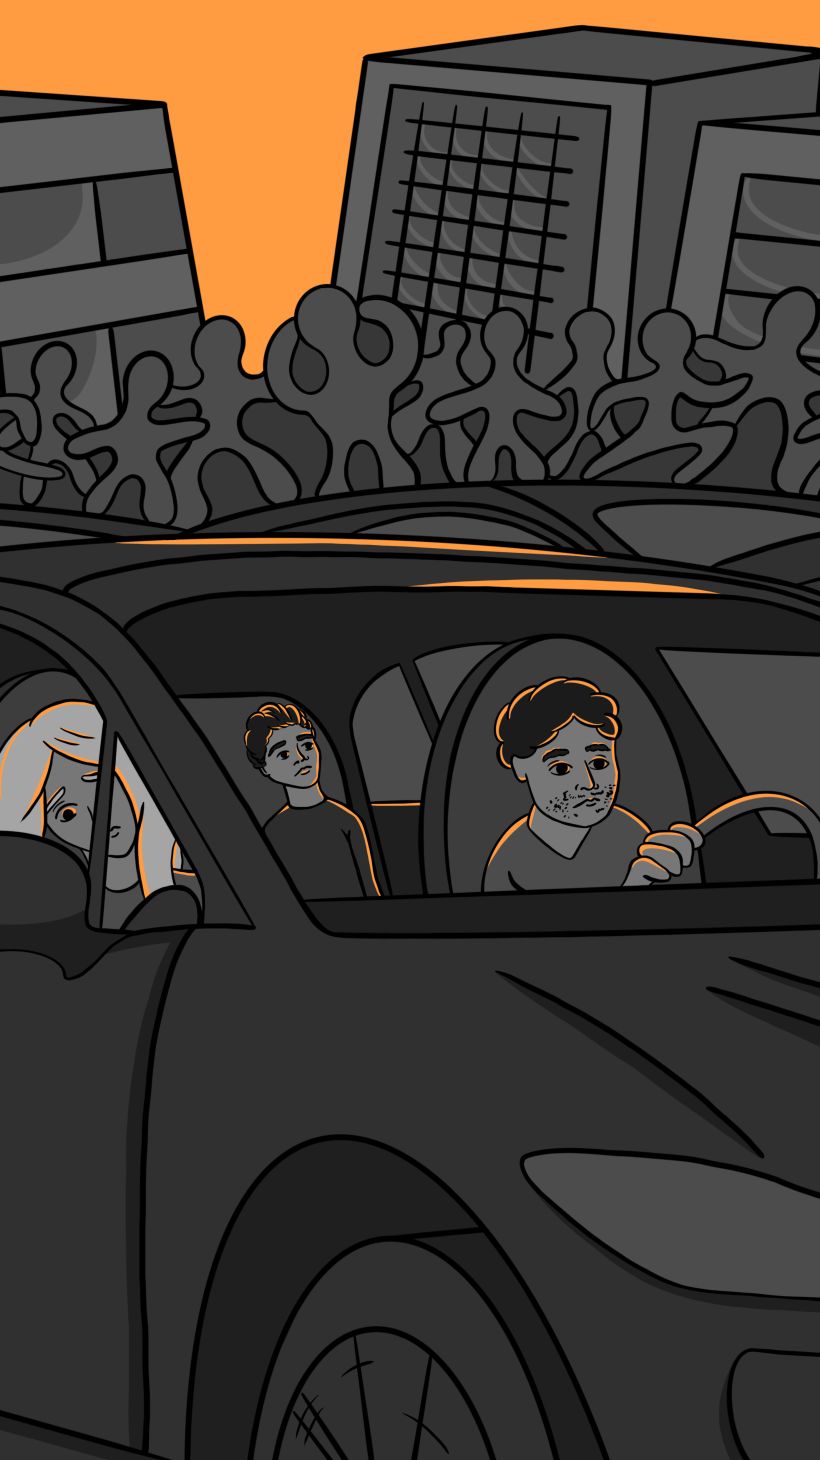 An illustration of someone driving a car with children in the back seat and a large group of people behind them.